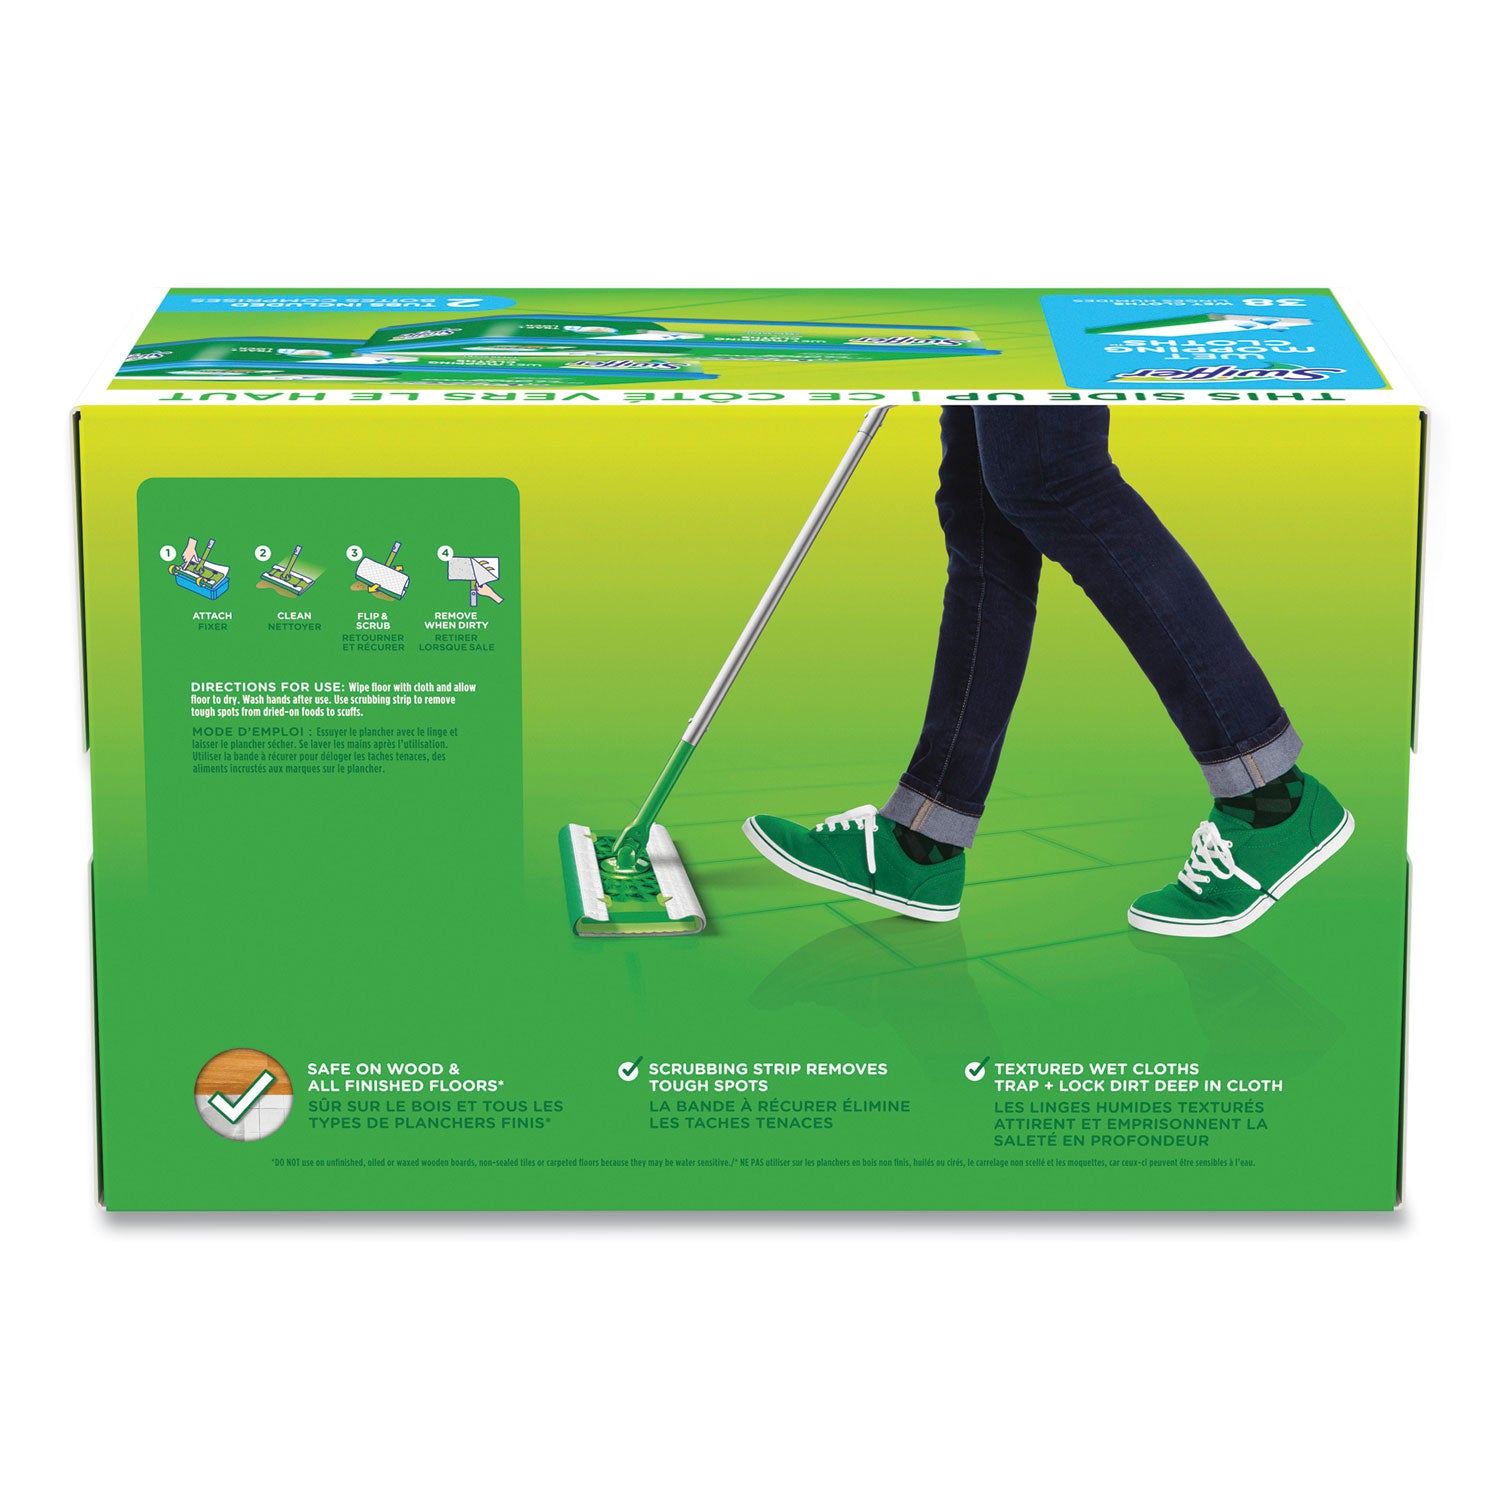 sweeper-trap-+-lock-wet-mop-cloth-8-x-10-white-open-window-scent-38-pack_pgc00742 - 3